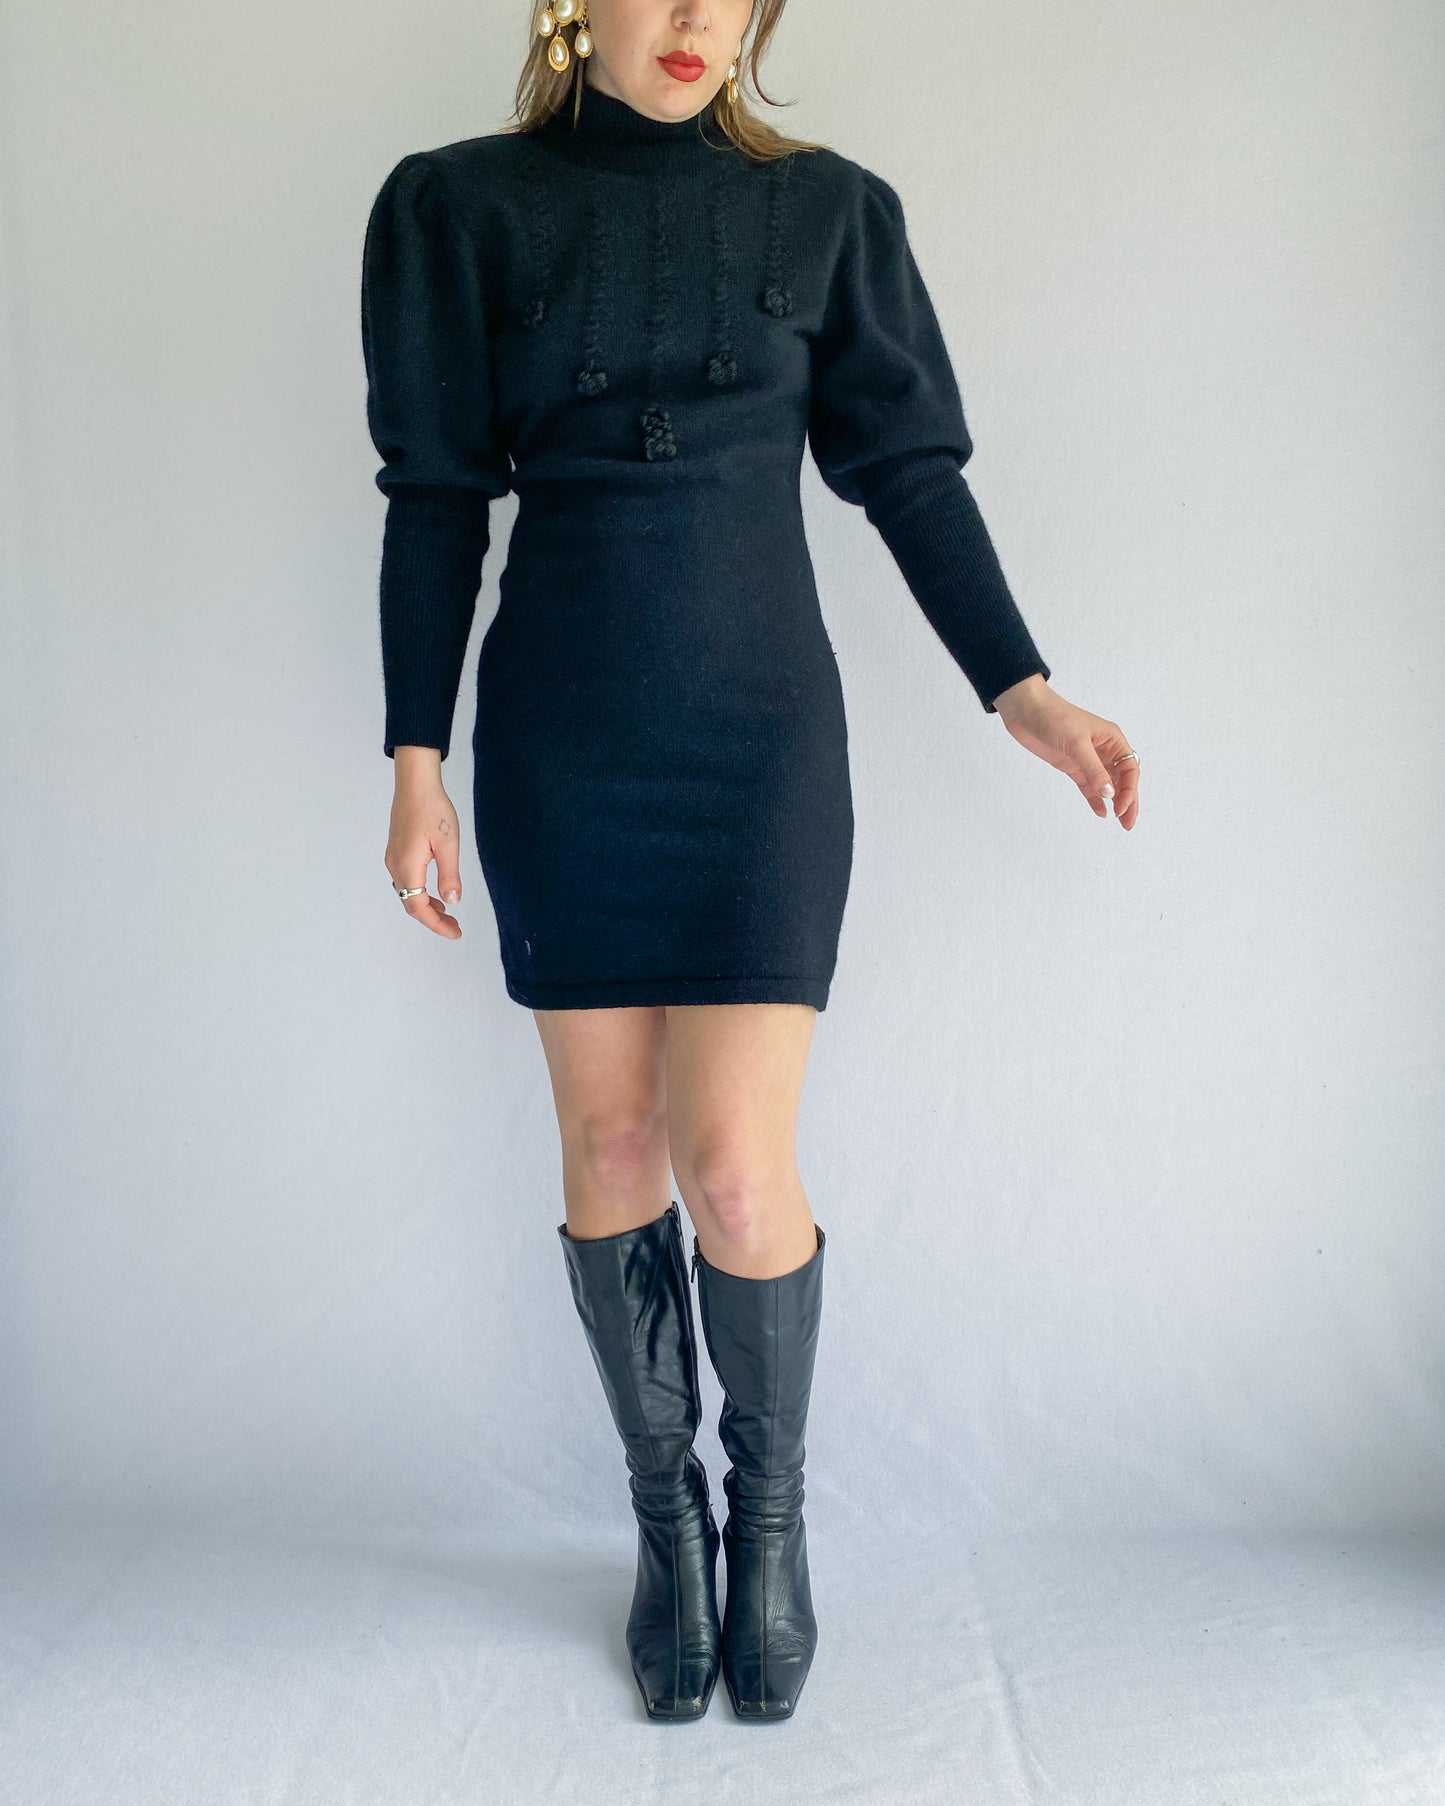 1980s Black Knit Dress with Mutton Sleeves | 10-12/14